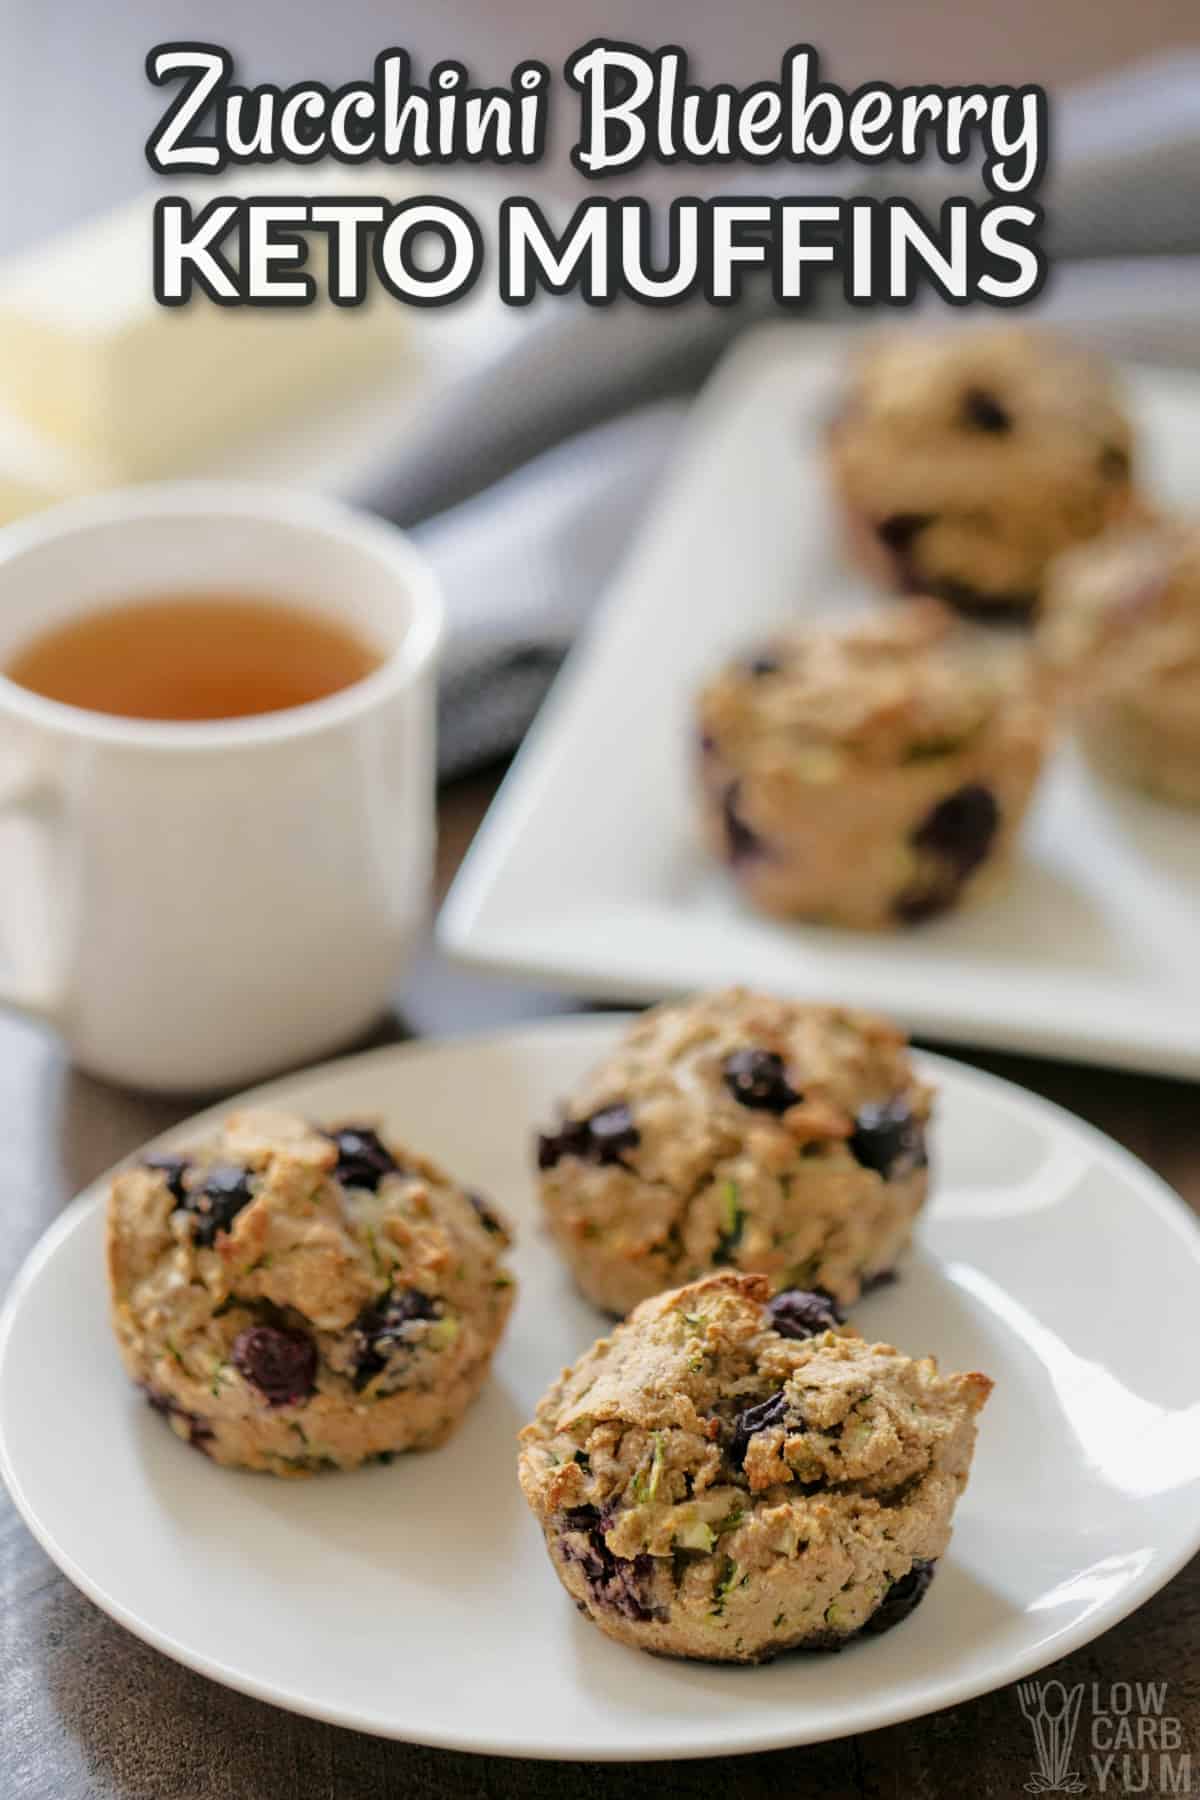 zucchini blueberry muffins with text overlay.